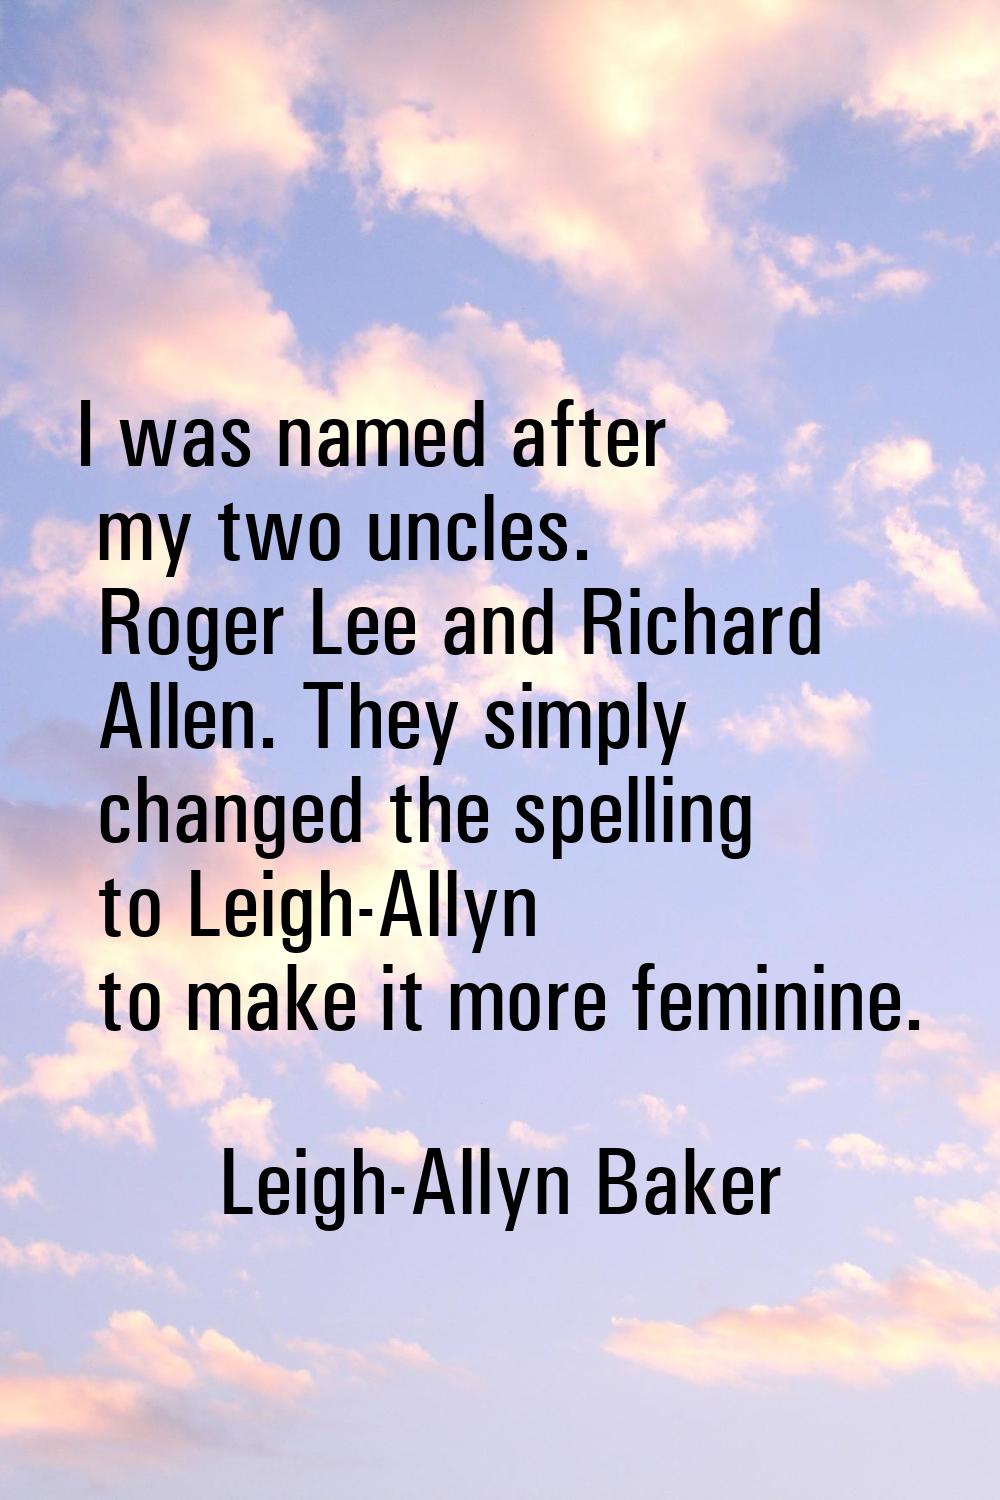 I was named after my two uncles. Roger Lee and Richard Allen. They simply changed the spelling to L